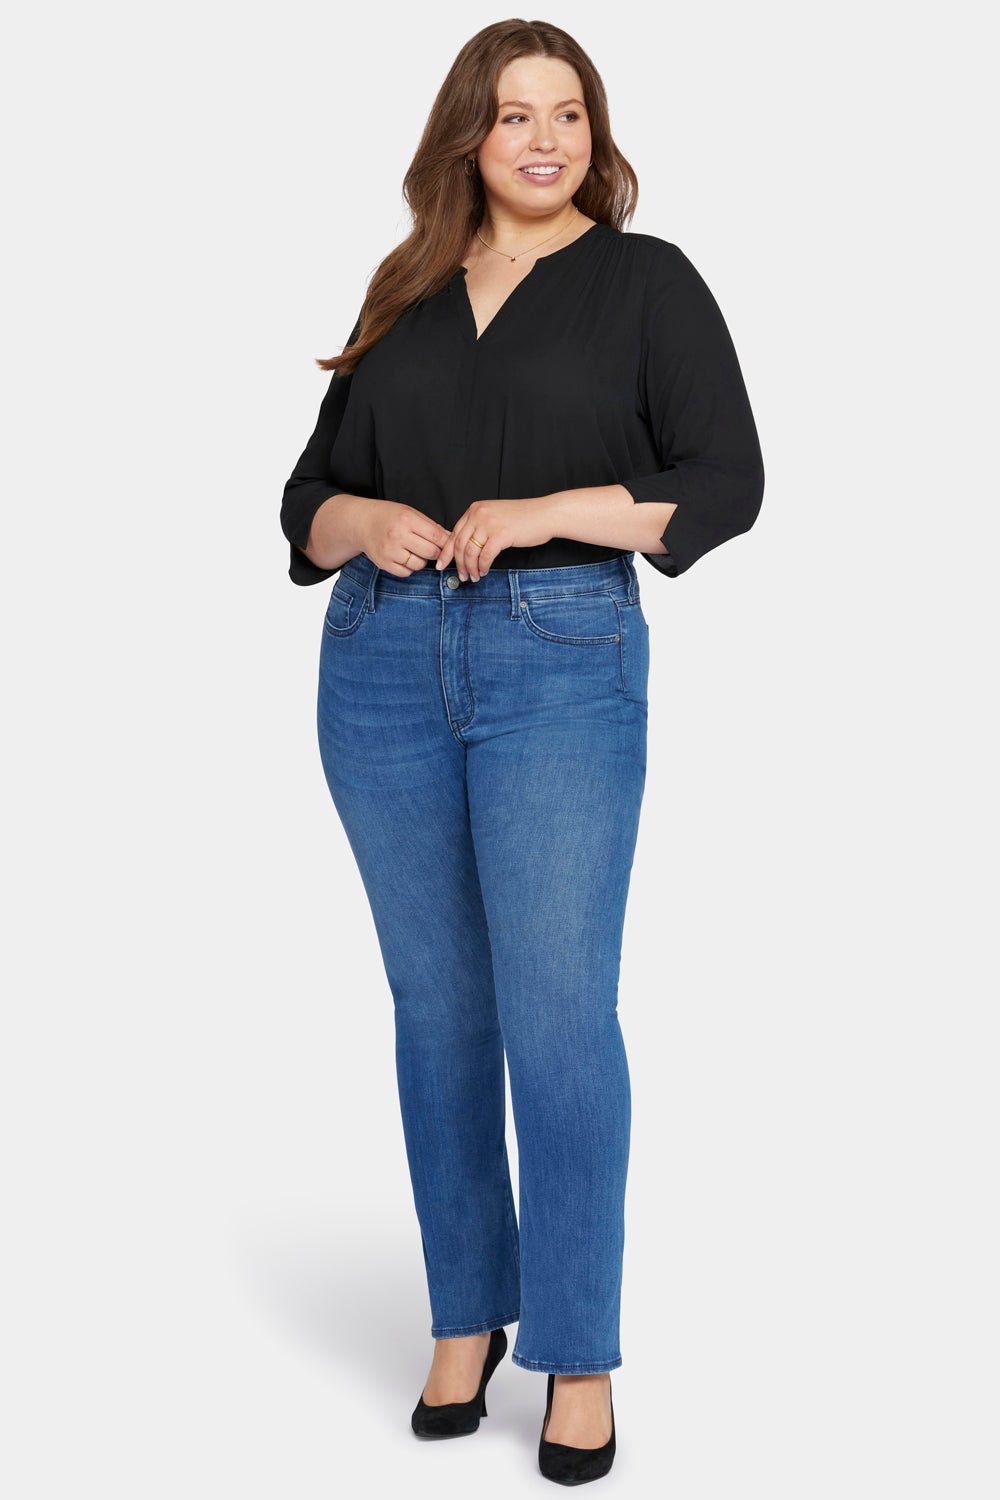 Le Silhouette Slim Bootcut Jeans In Long Inseam With High Rise - Amour Blue  | NYDJ